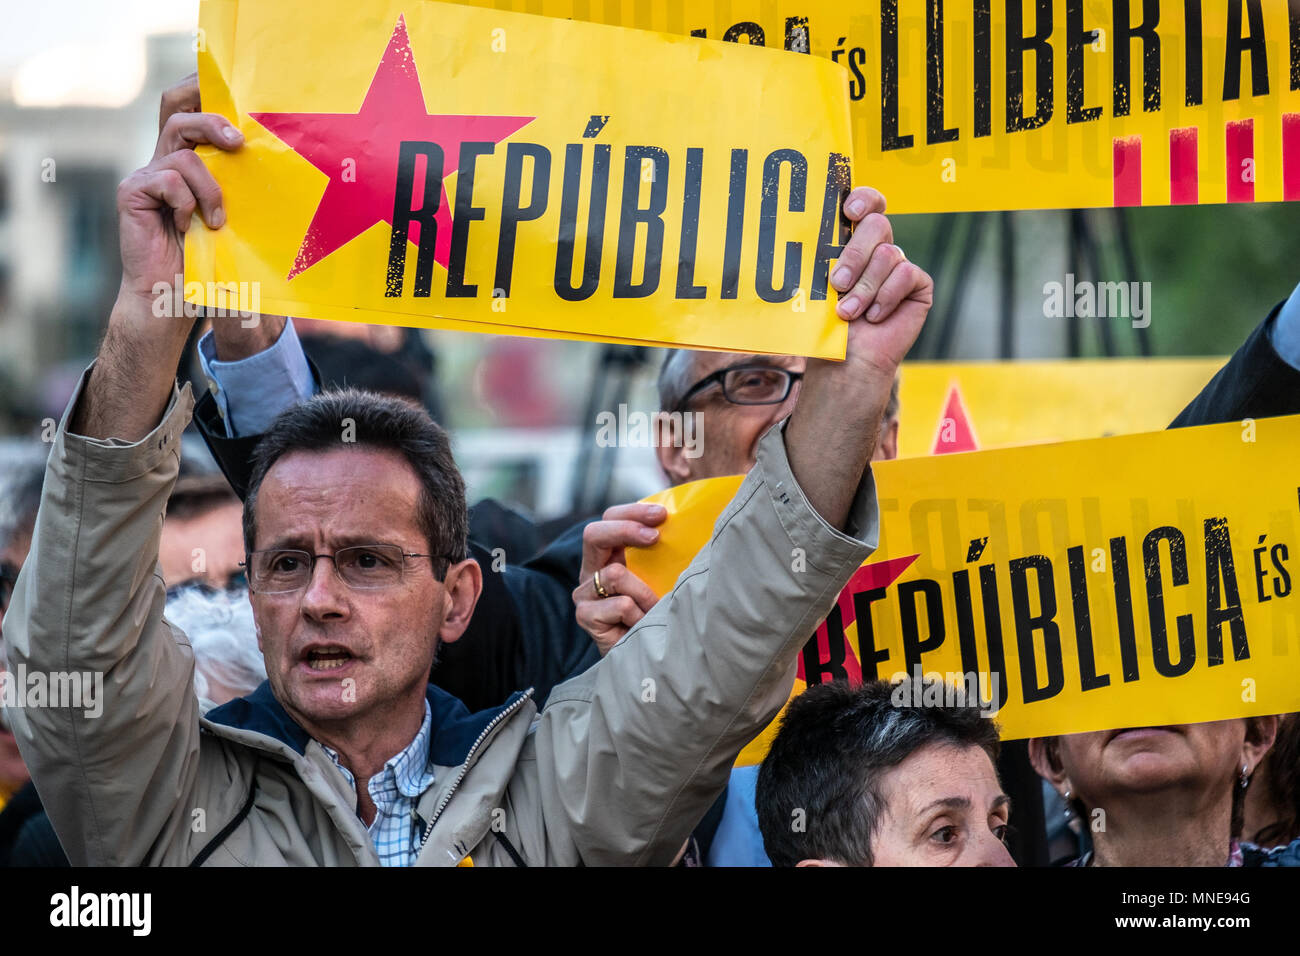 A protester is seen showing a sign with the text 'Catalan Republic'. Act of protest to request the release of political prisoners Jordi Sànchez and Jordi Cuixart who have been in prison for seven months. It is the circumstance that it has been the first act in Catalonia of the president-elect of the Generalitat Qim Torra who has attended the rally. Stock Photo